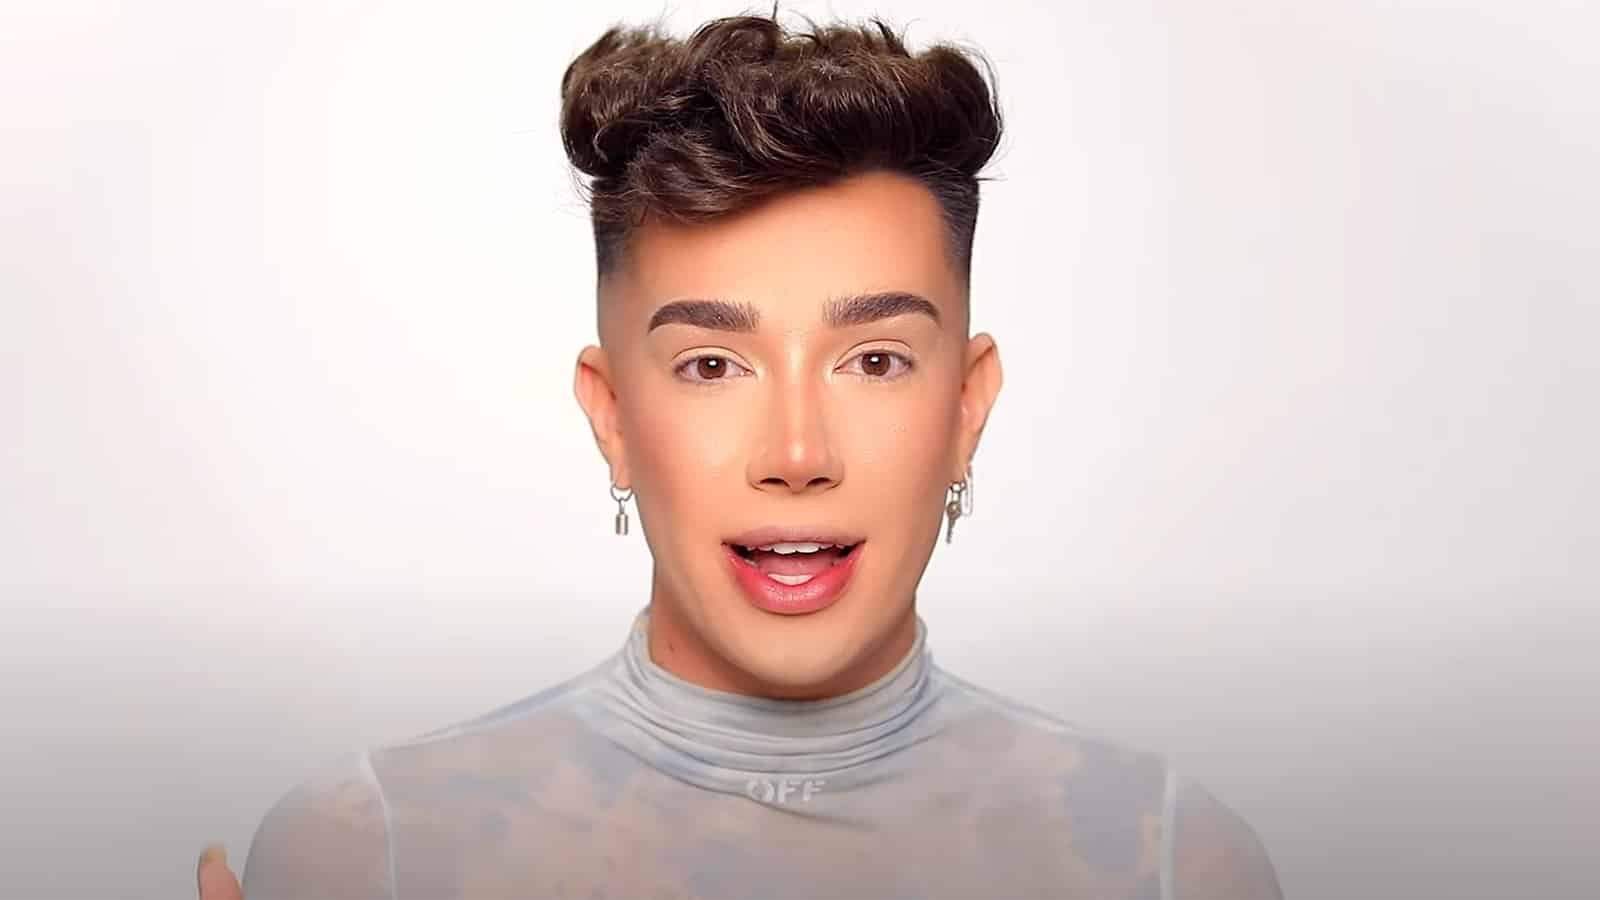 James Charles returns to YouTube after accusations